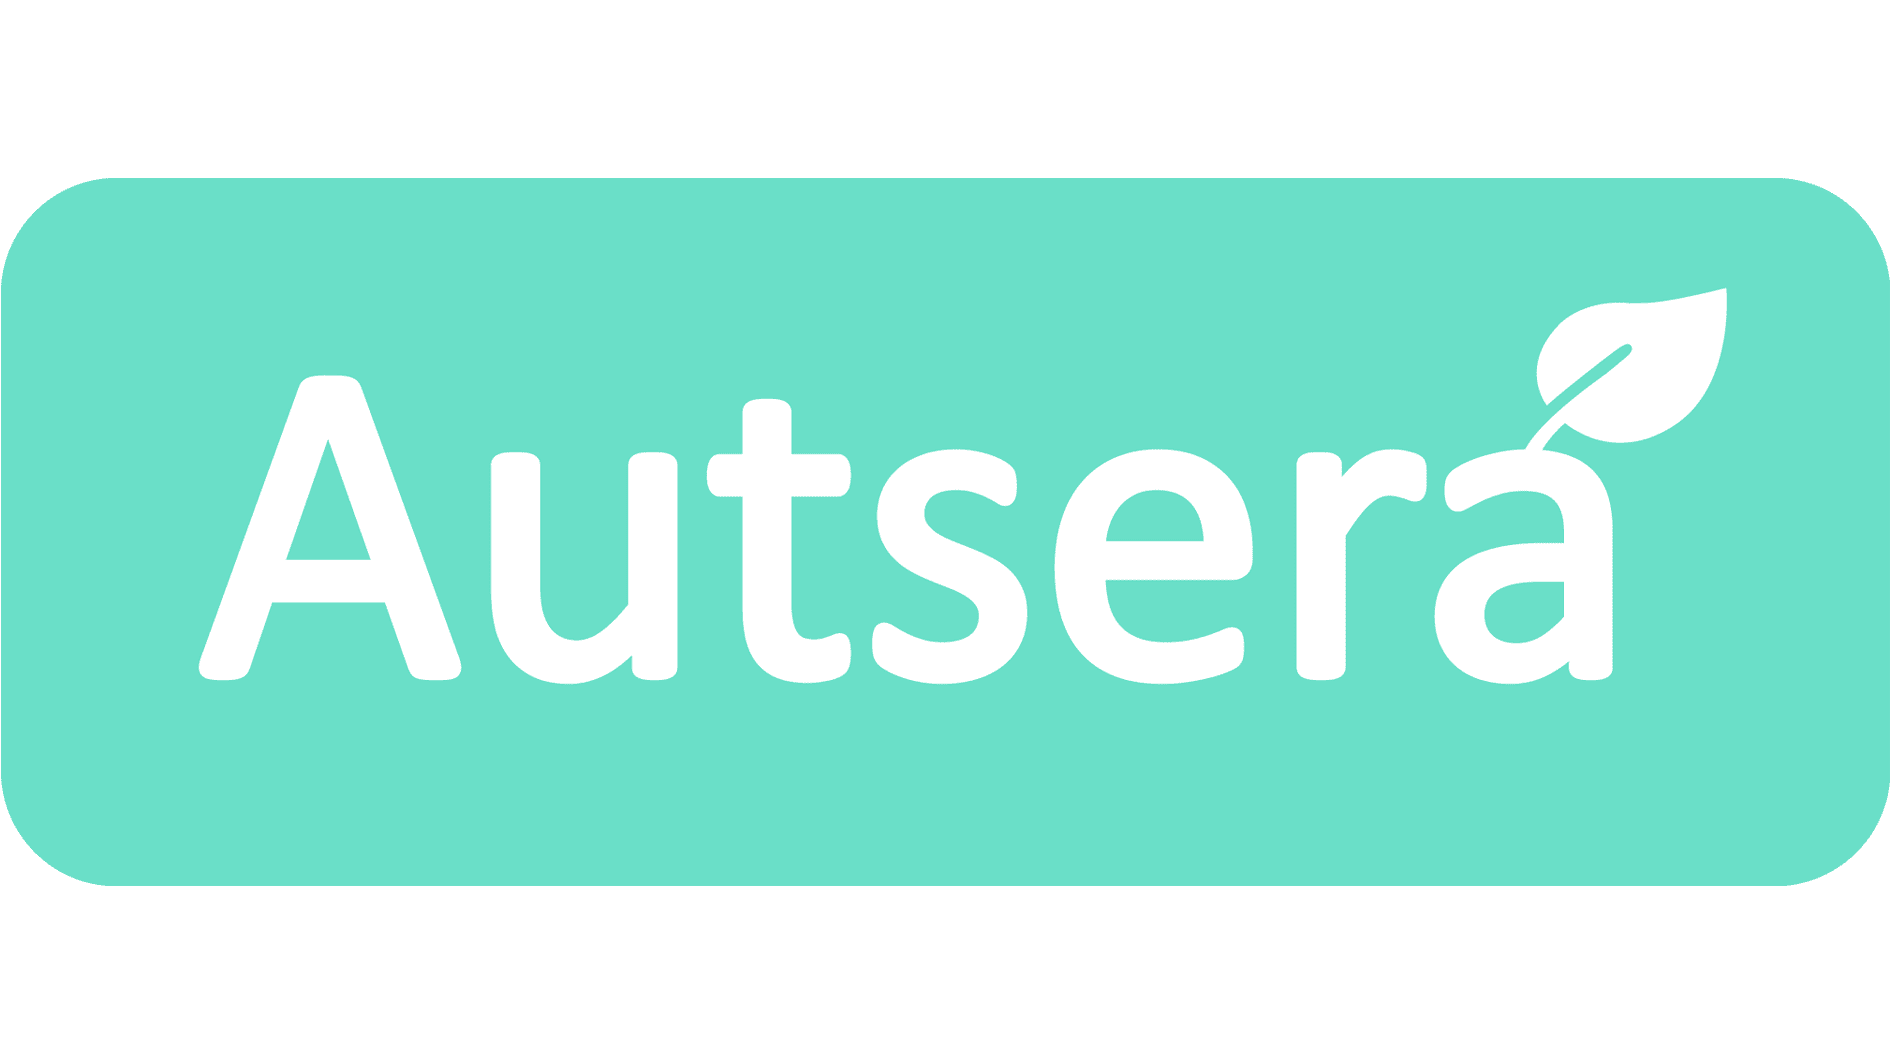 Launchpad Company Autsera Launches VoxiPlay: Pioneering AI-powered Speech Therapy for Children - DigitalHealth.London